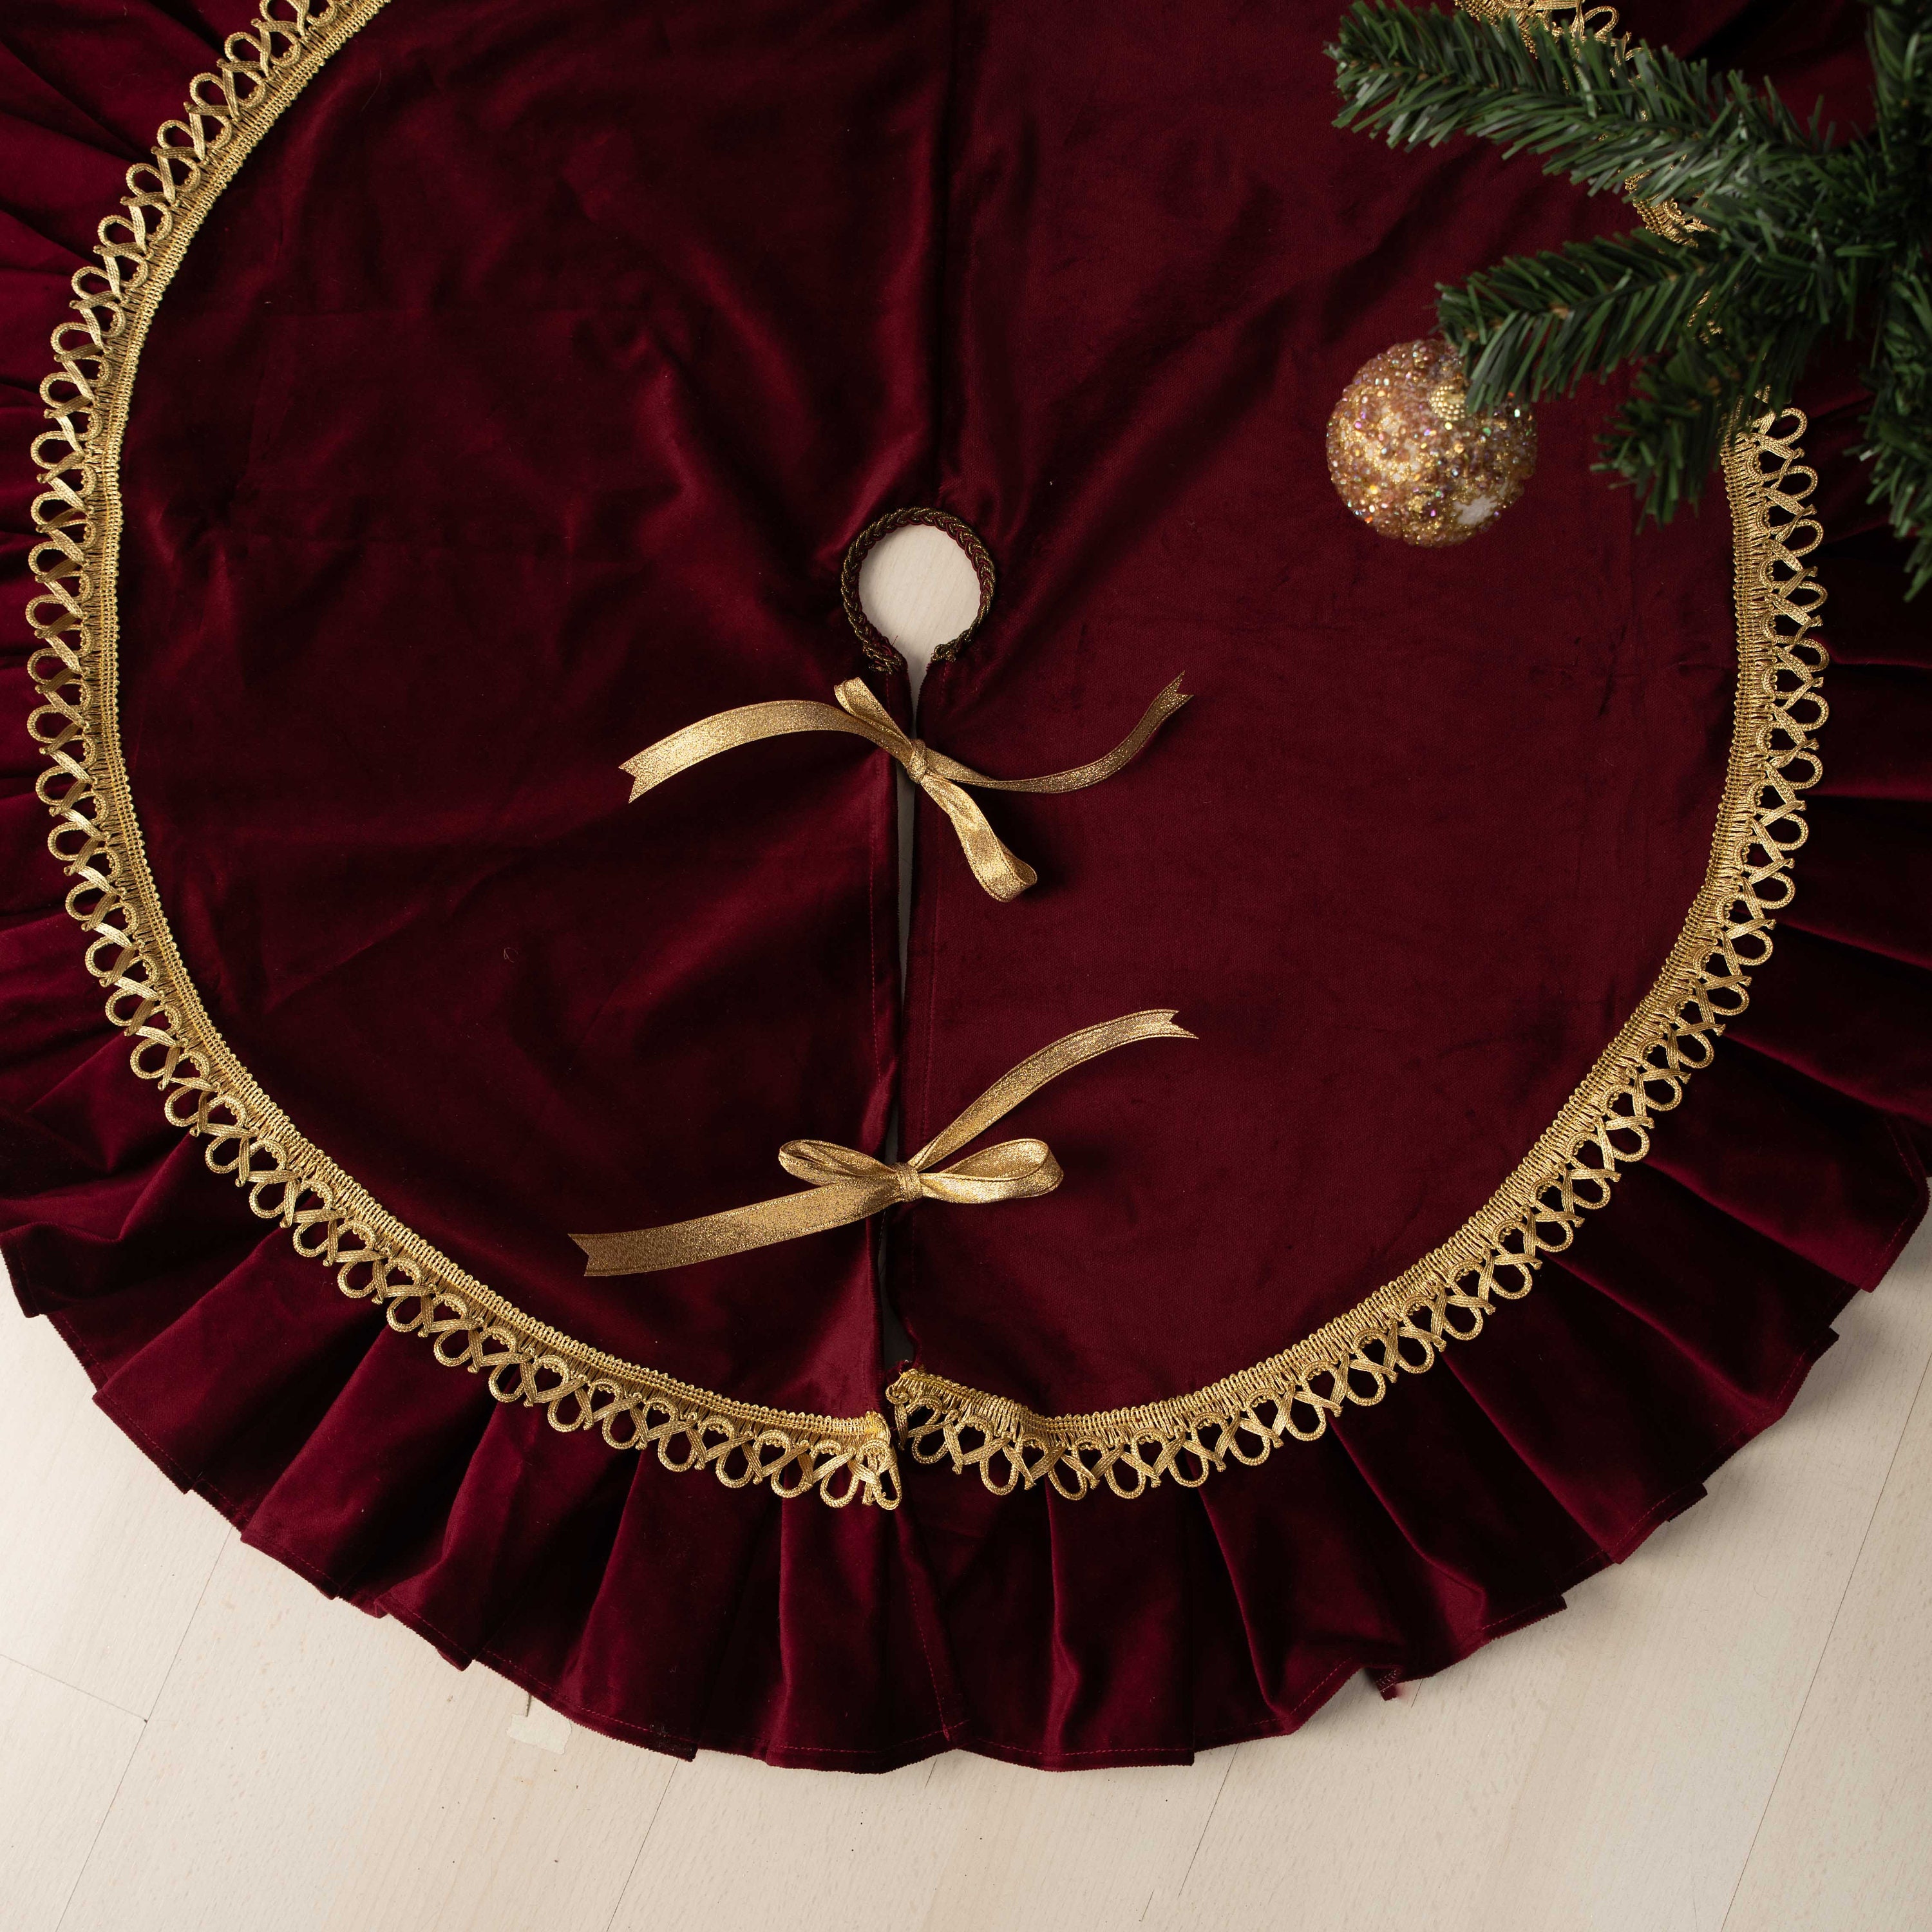 Ayieyill Christmas Tree Skirt, 48 inches Cable Knit Knitted Thick Rustic  Xmas Tree Skirts Decoration, Red Tree Skirt Christmas Decoration, Burgundy  - Walmart.com